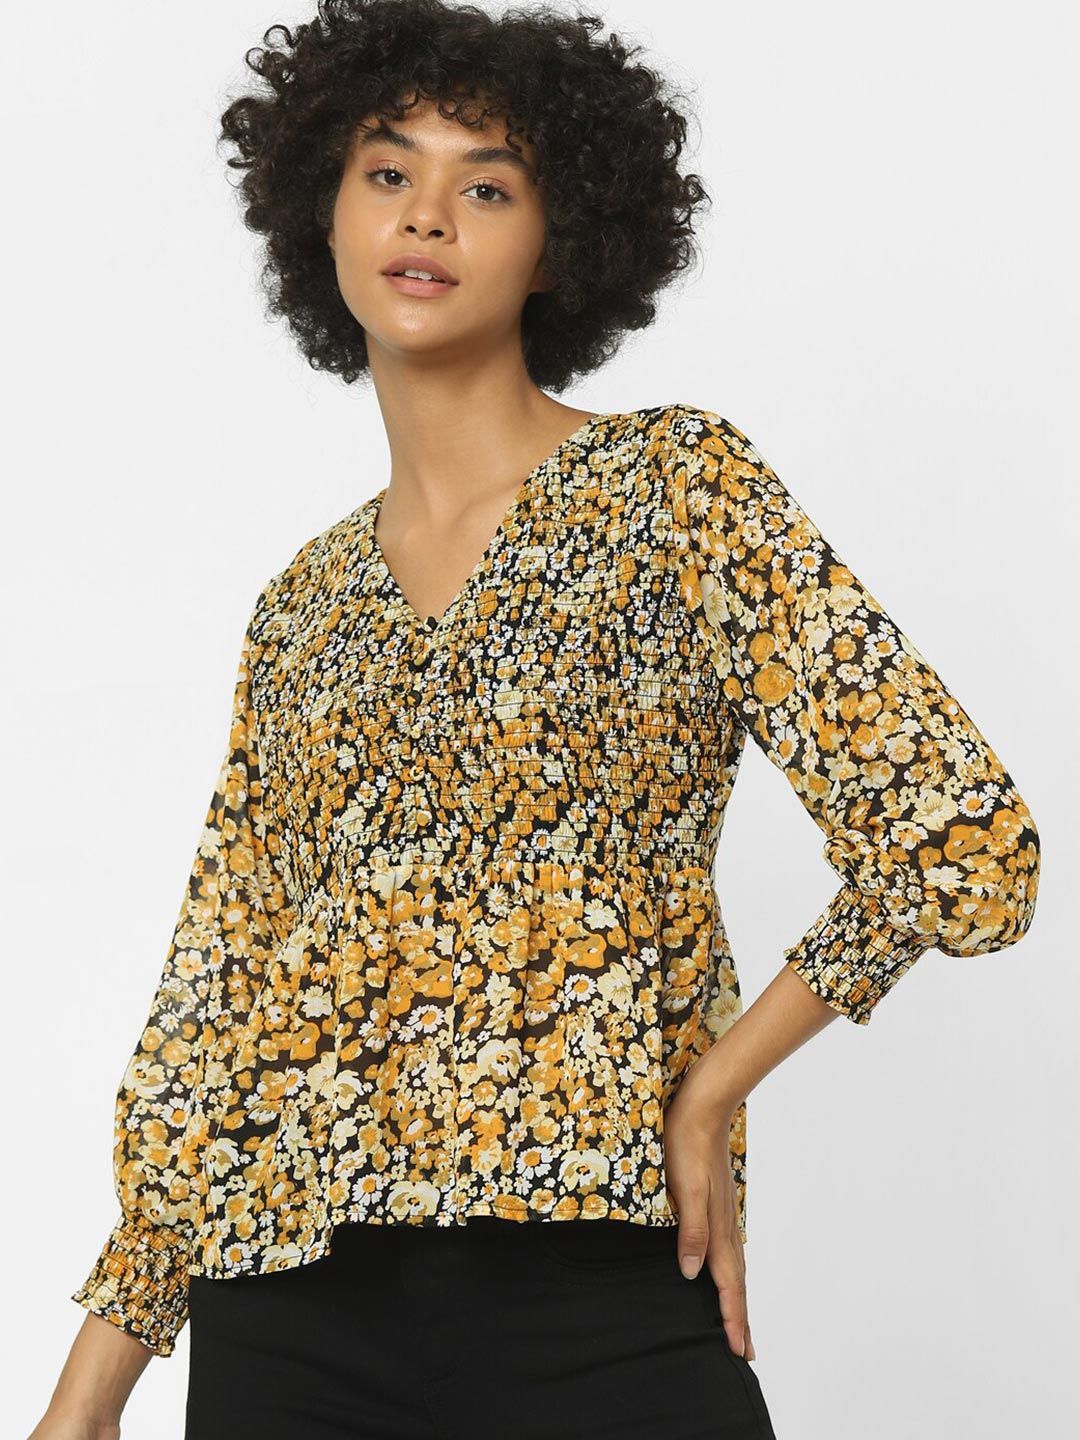 ONLY Mustard Yellow & Black Floral Print Peplum Top Price in India